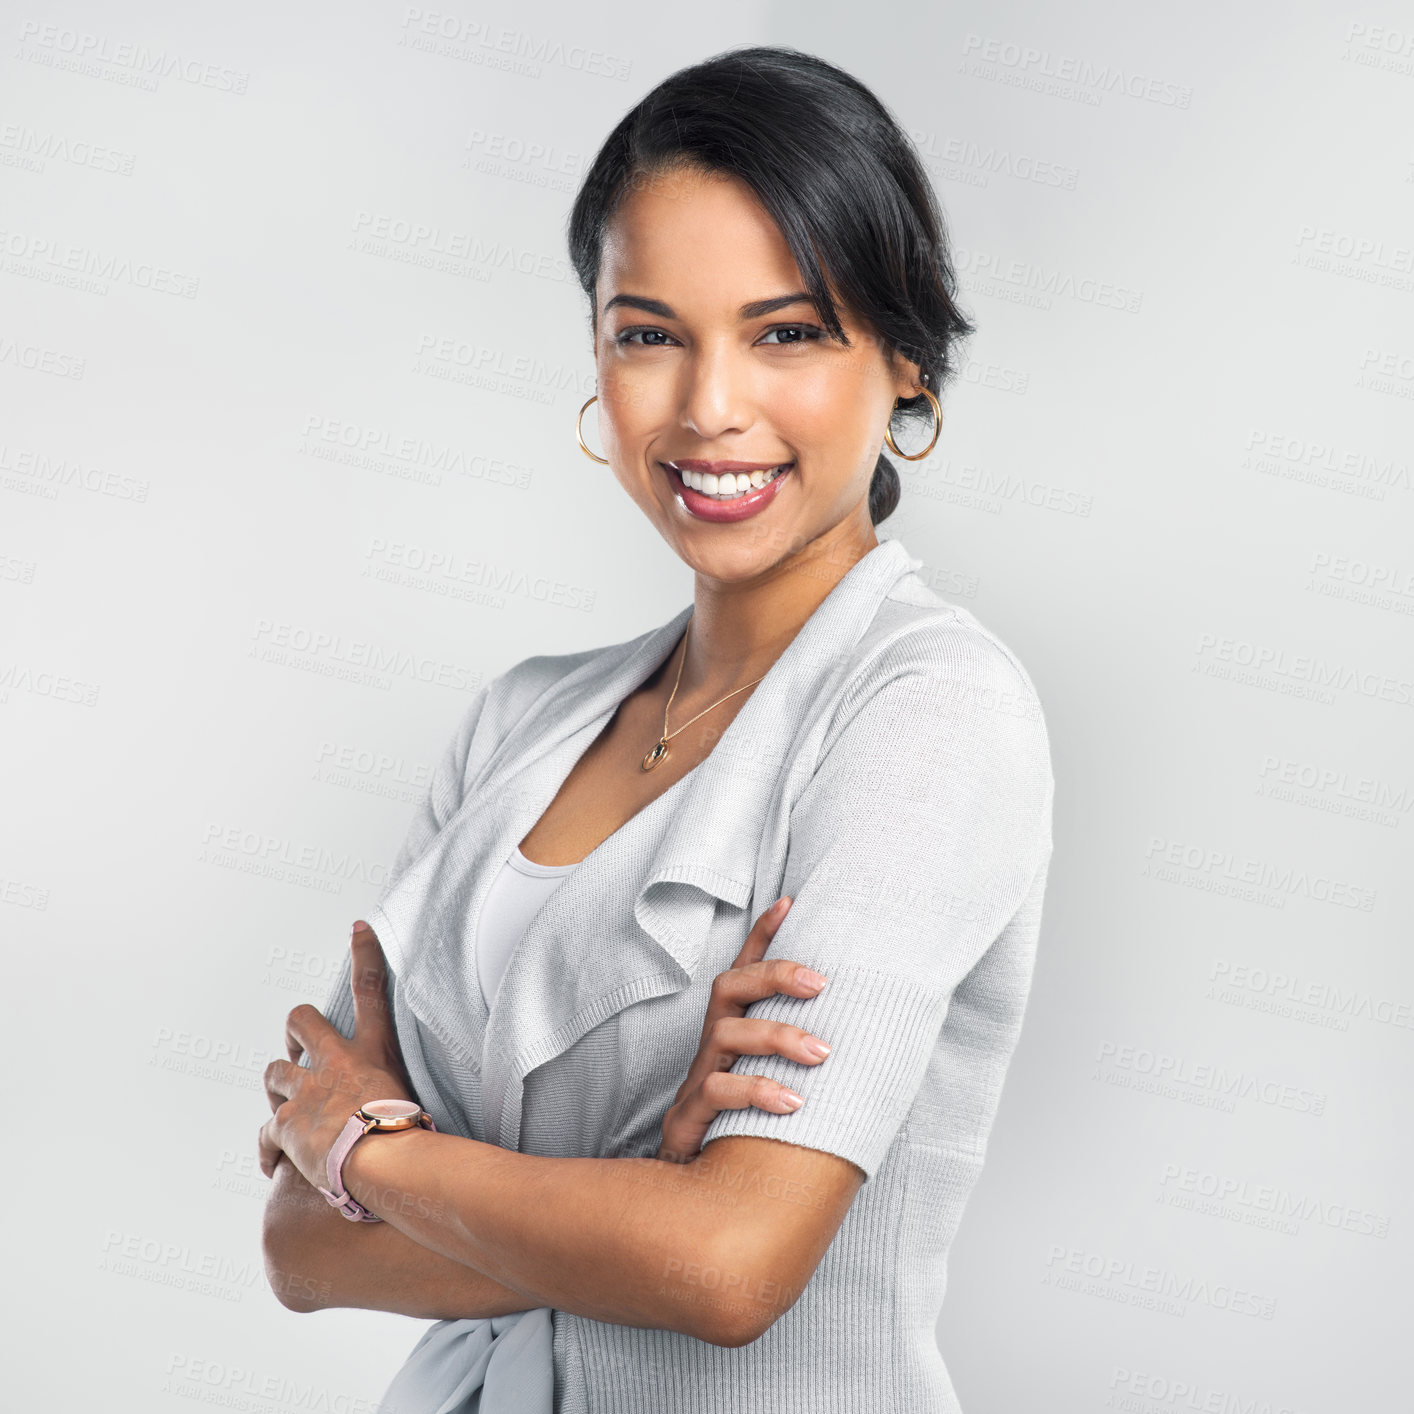 Buy stock photo Studio shot of a confident young businesswoman posing against a grey background